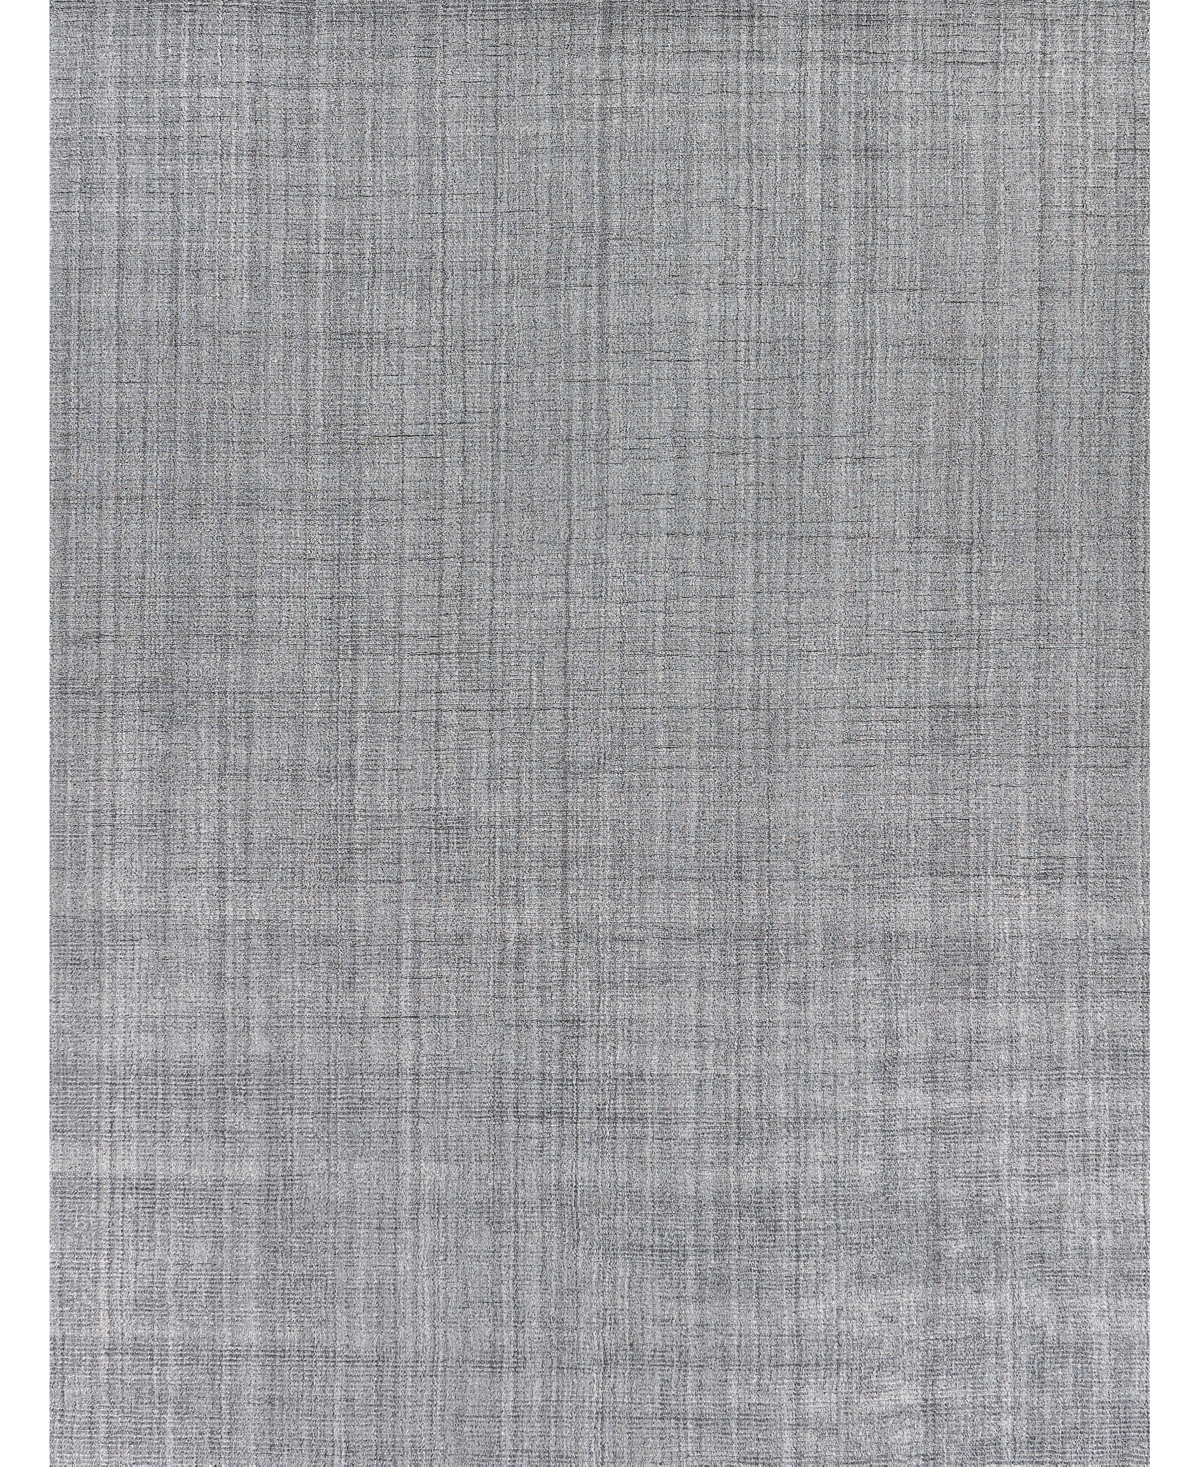 Exquisite Rugs Robin Er3780 8' X 10' Area Rug In Charcoal